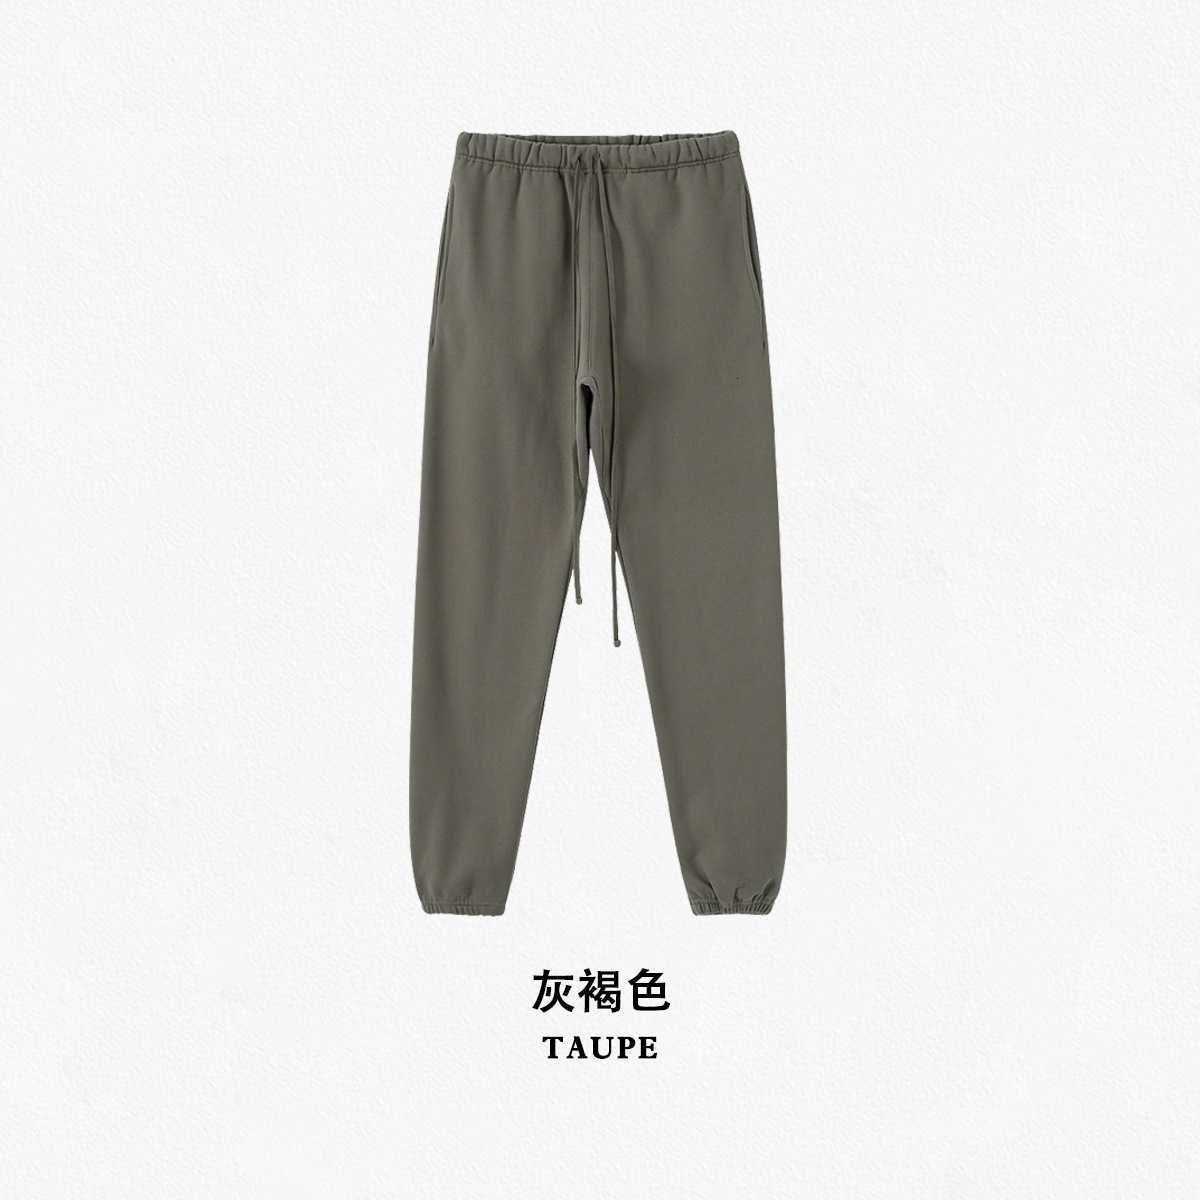 Taupe Trousers